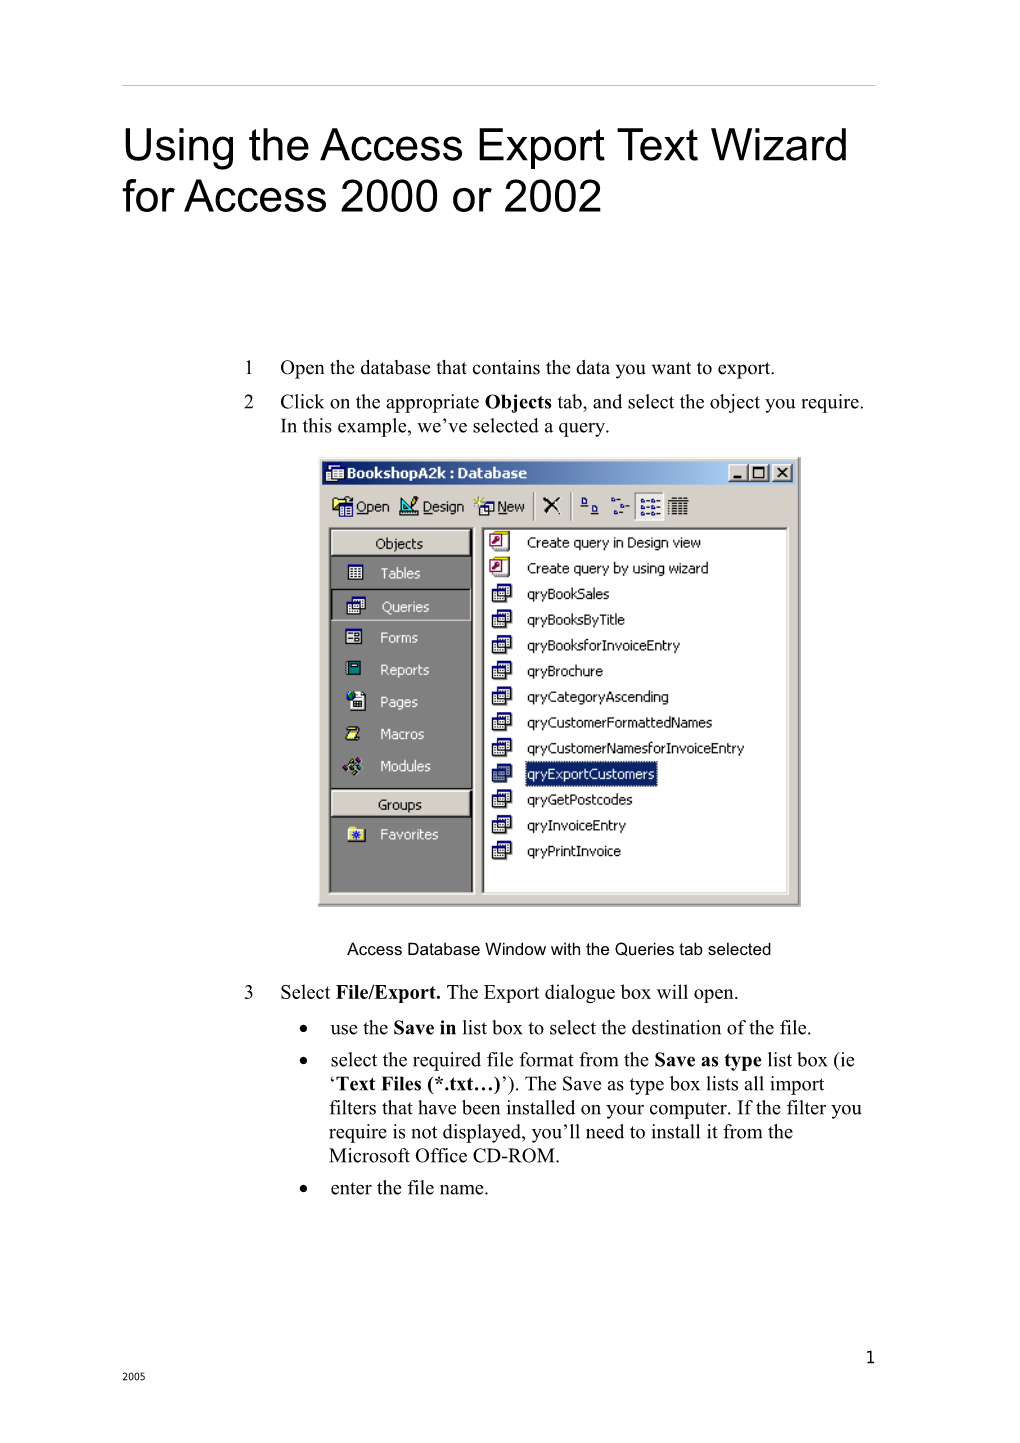 Using the Access Export Text Wizard for Access 2000 Or 2002